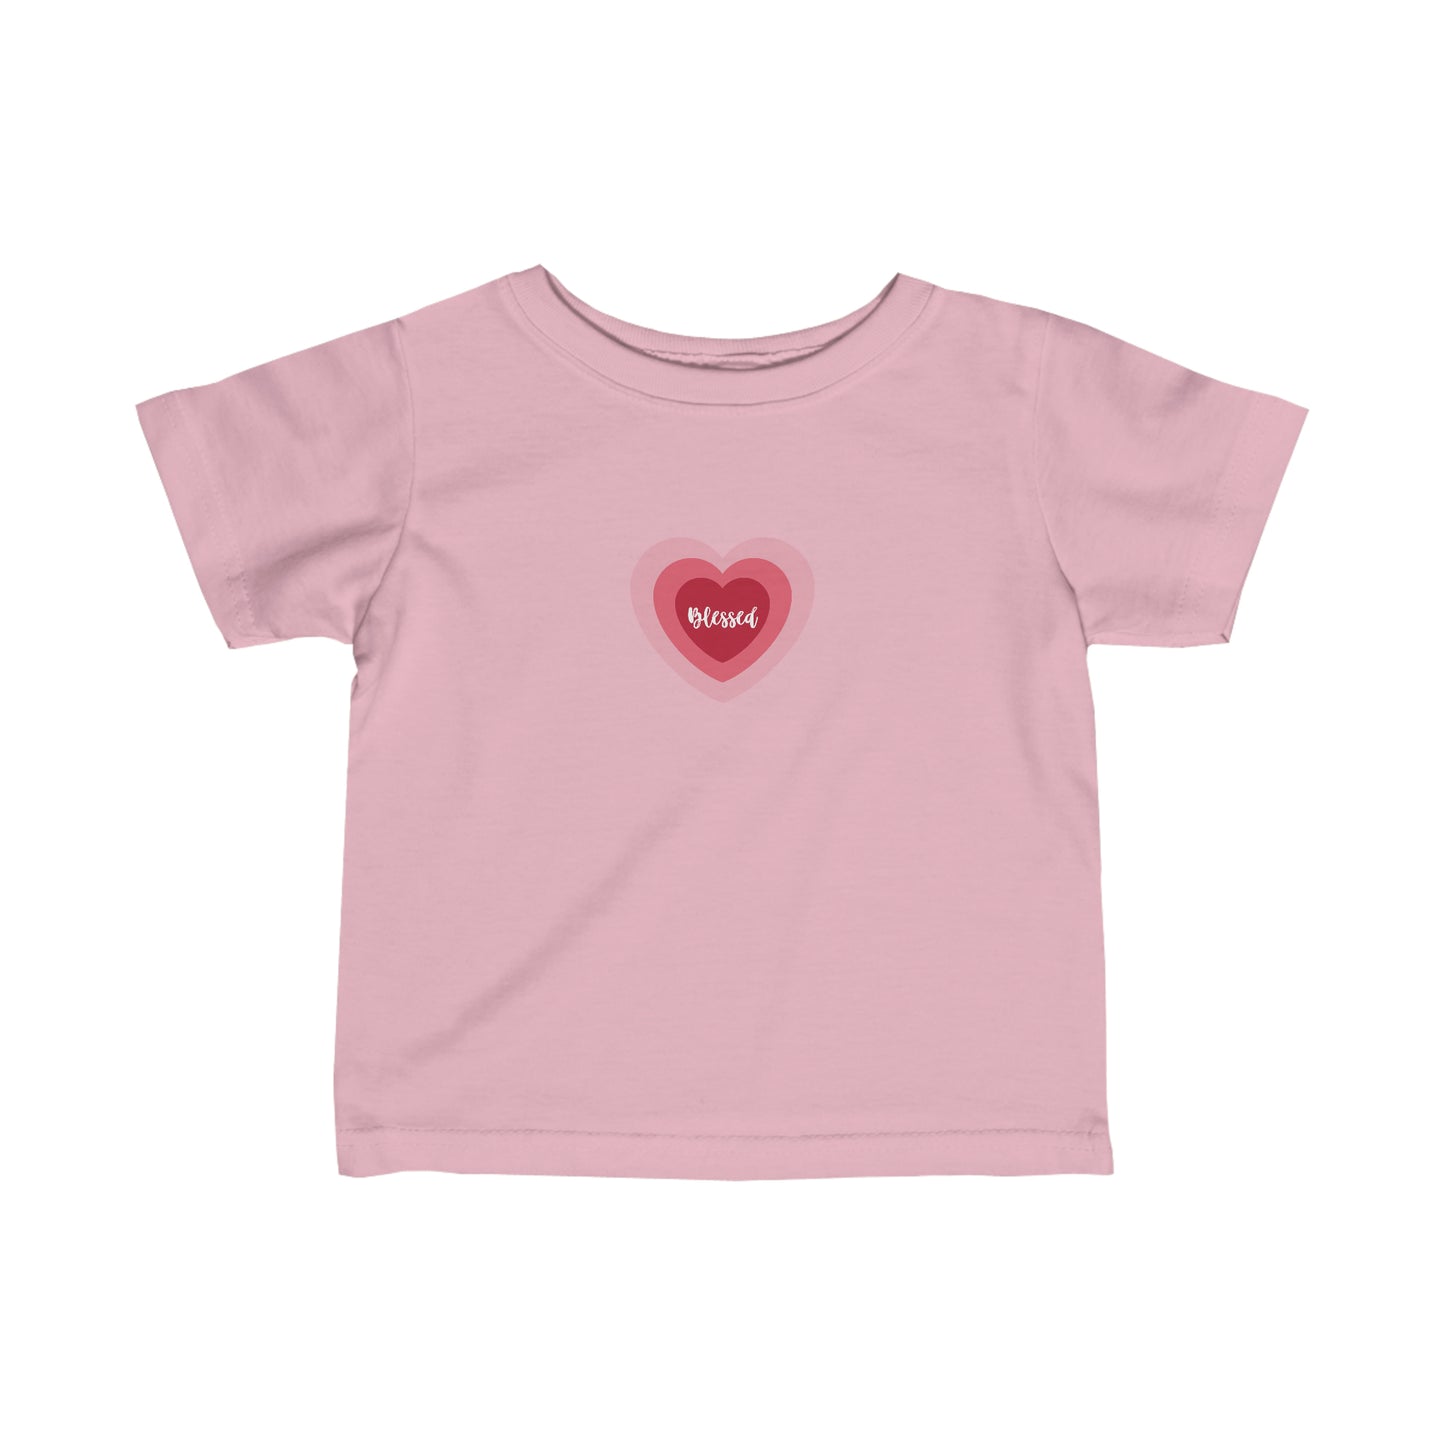 Blessed Heart - Infant Jersey Tee